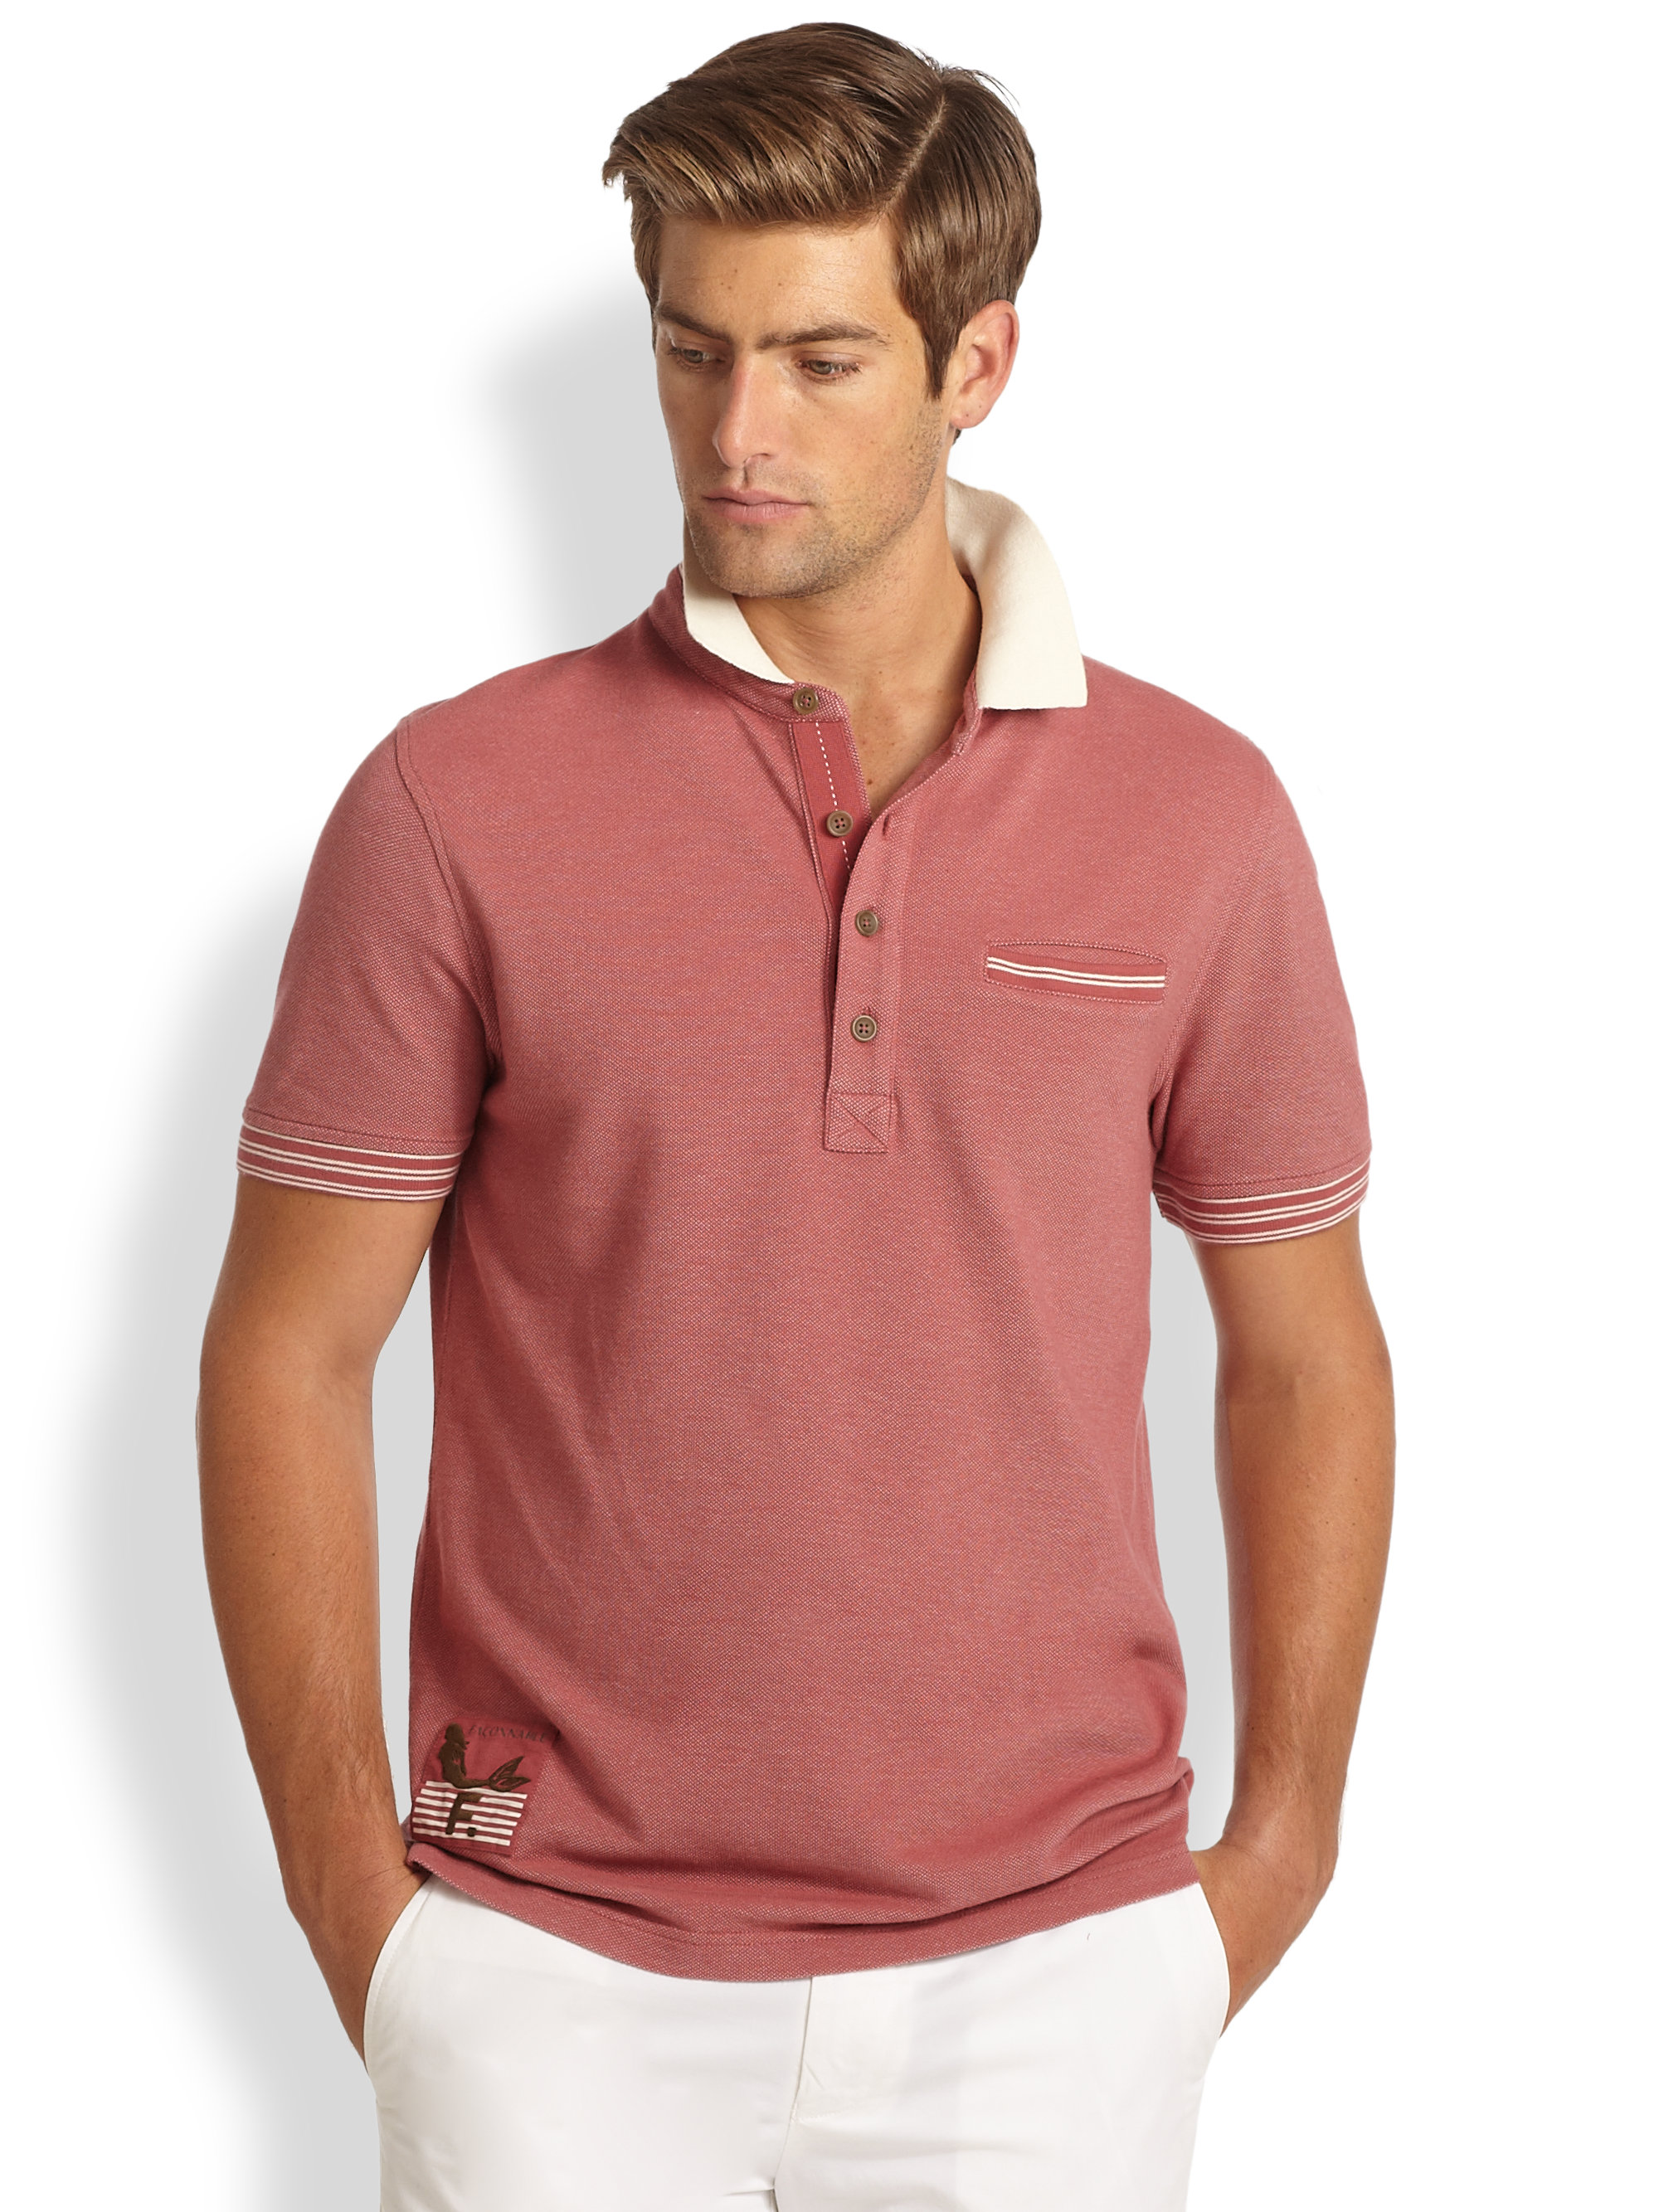 Lyst - Façonnable Striped Knit Polo Shirt in Red for Men